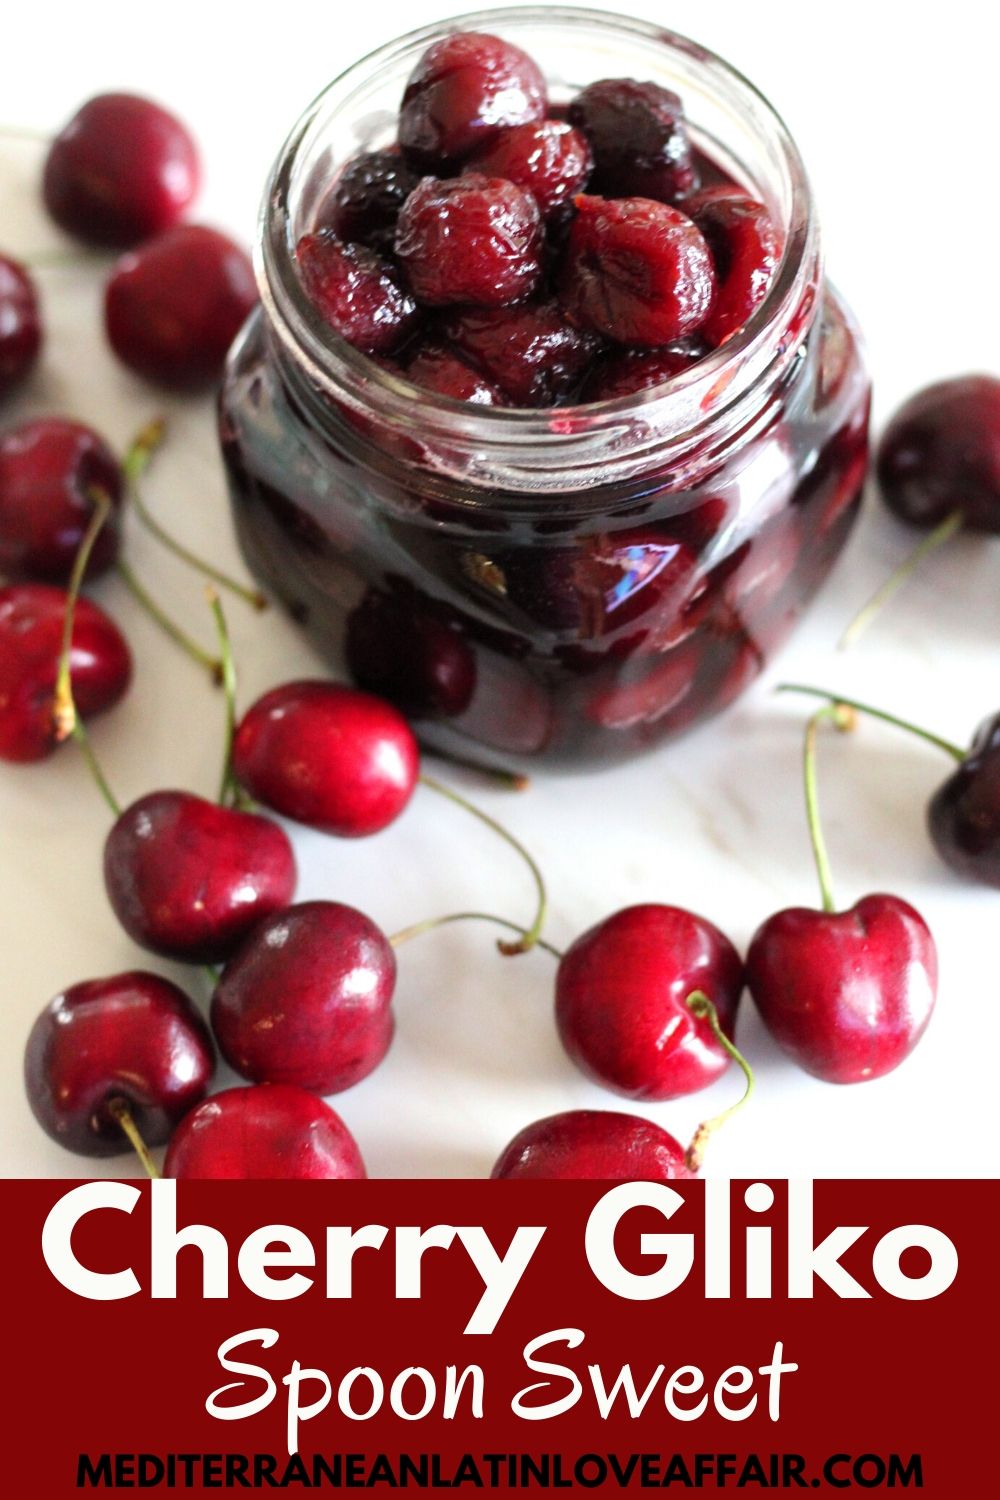 Cherry spoon sweet shown in a jar, surrounded by fresh cherries. Image is prepared specifically for Pinterest because it is shown with a banner that has the title Cherry Gliko across.